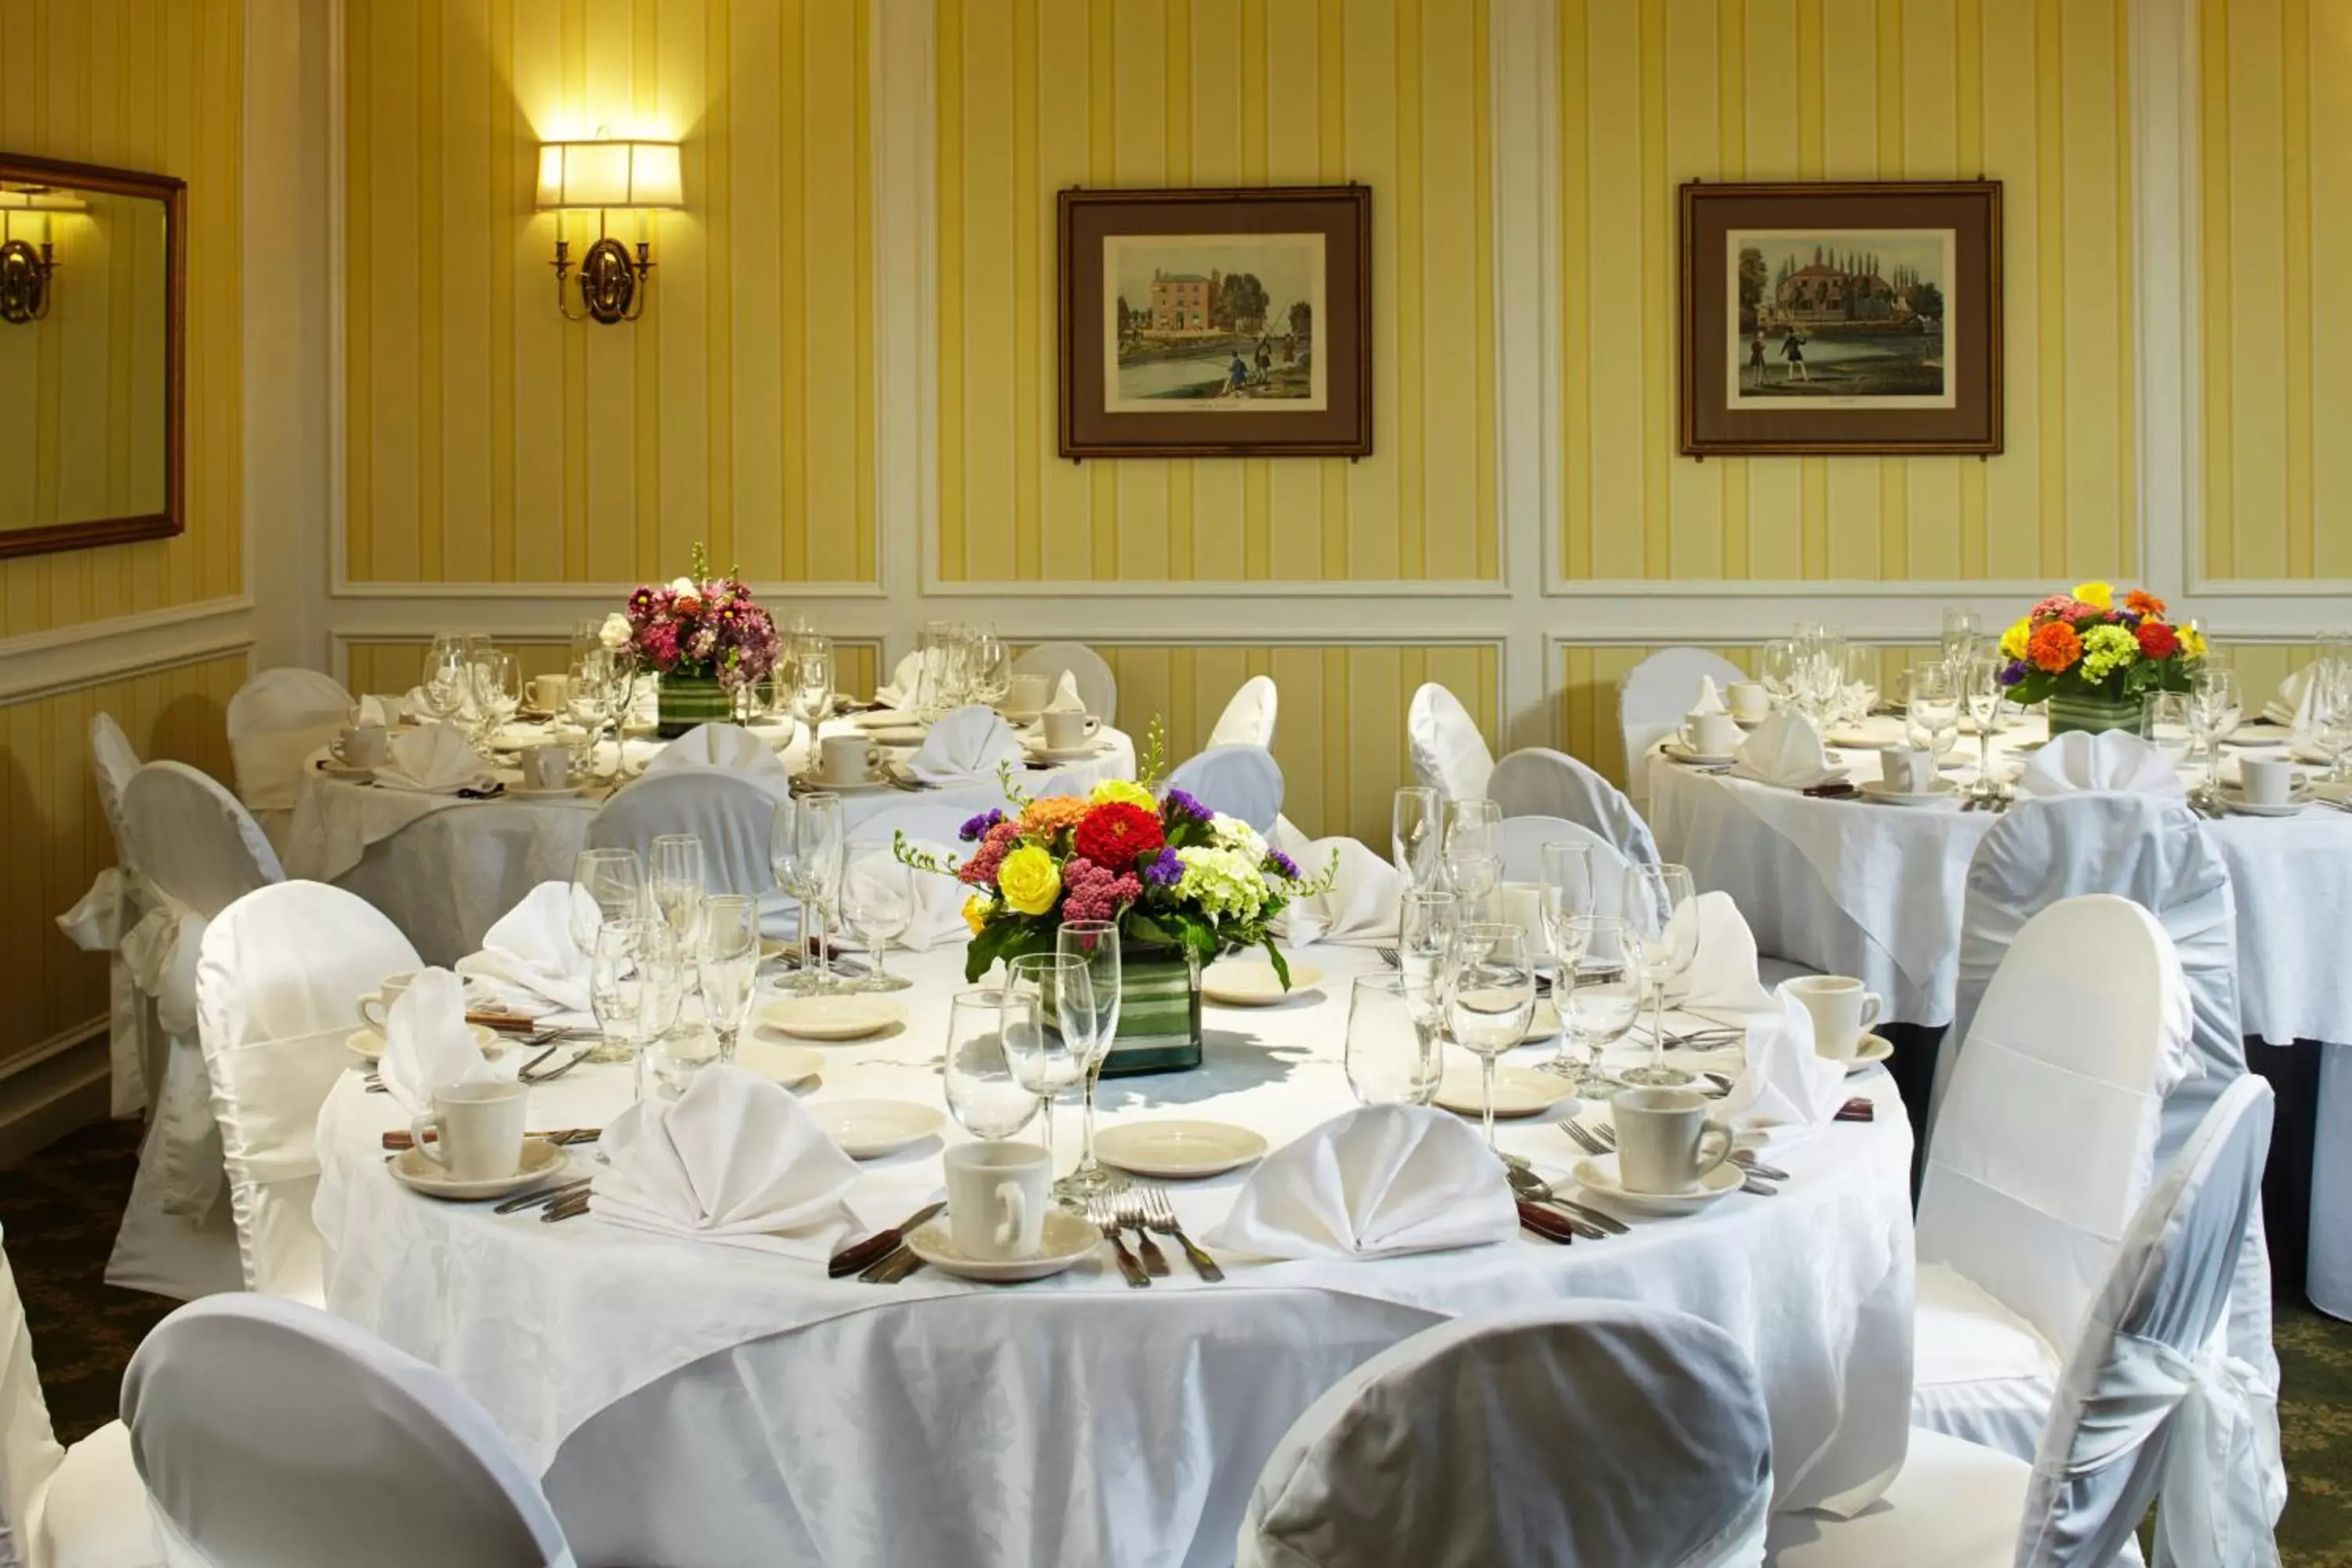 Restaurant/places to eat, Banquet Facilities in Concord's Colonial Inn